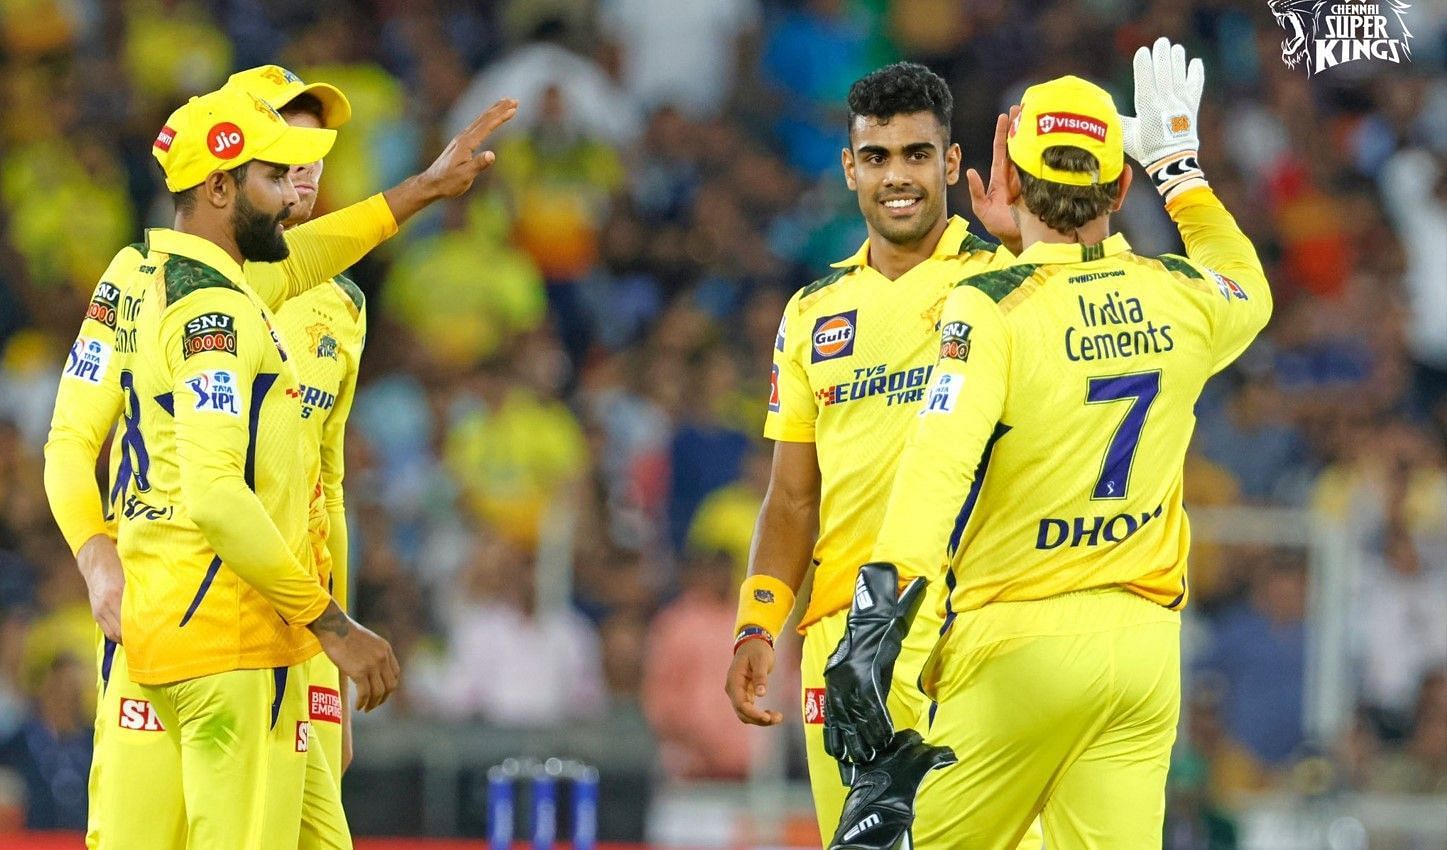 CSK players in action (Image Courtesy: Twitter/Chennai Super Kings)